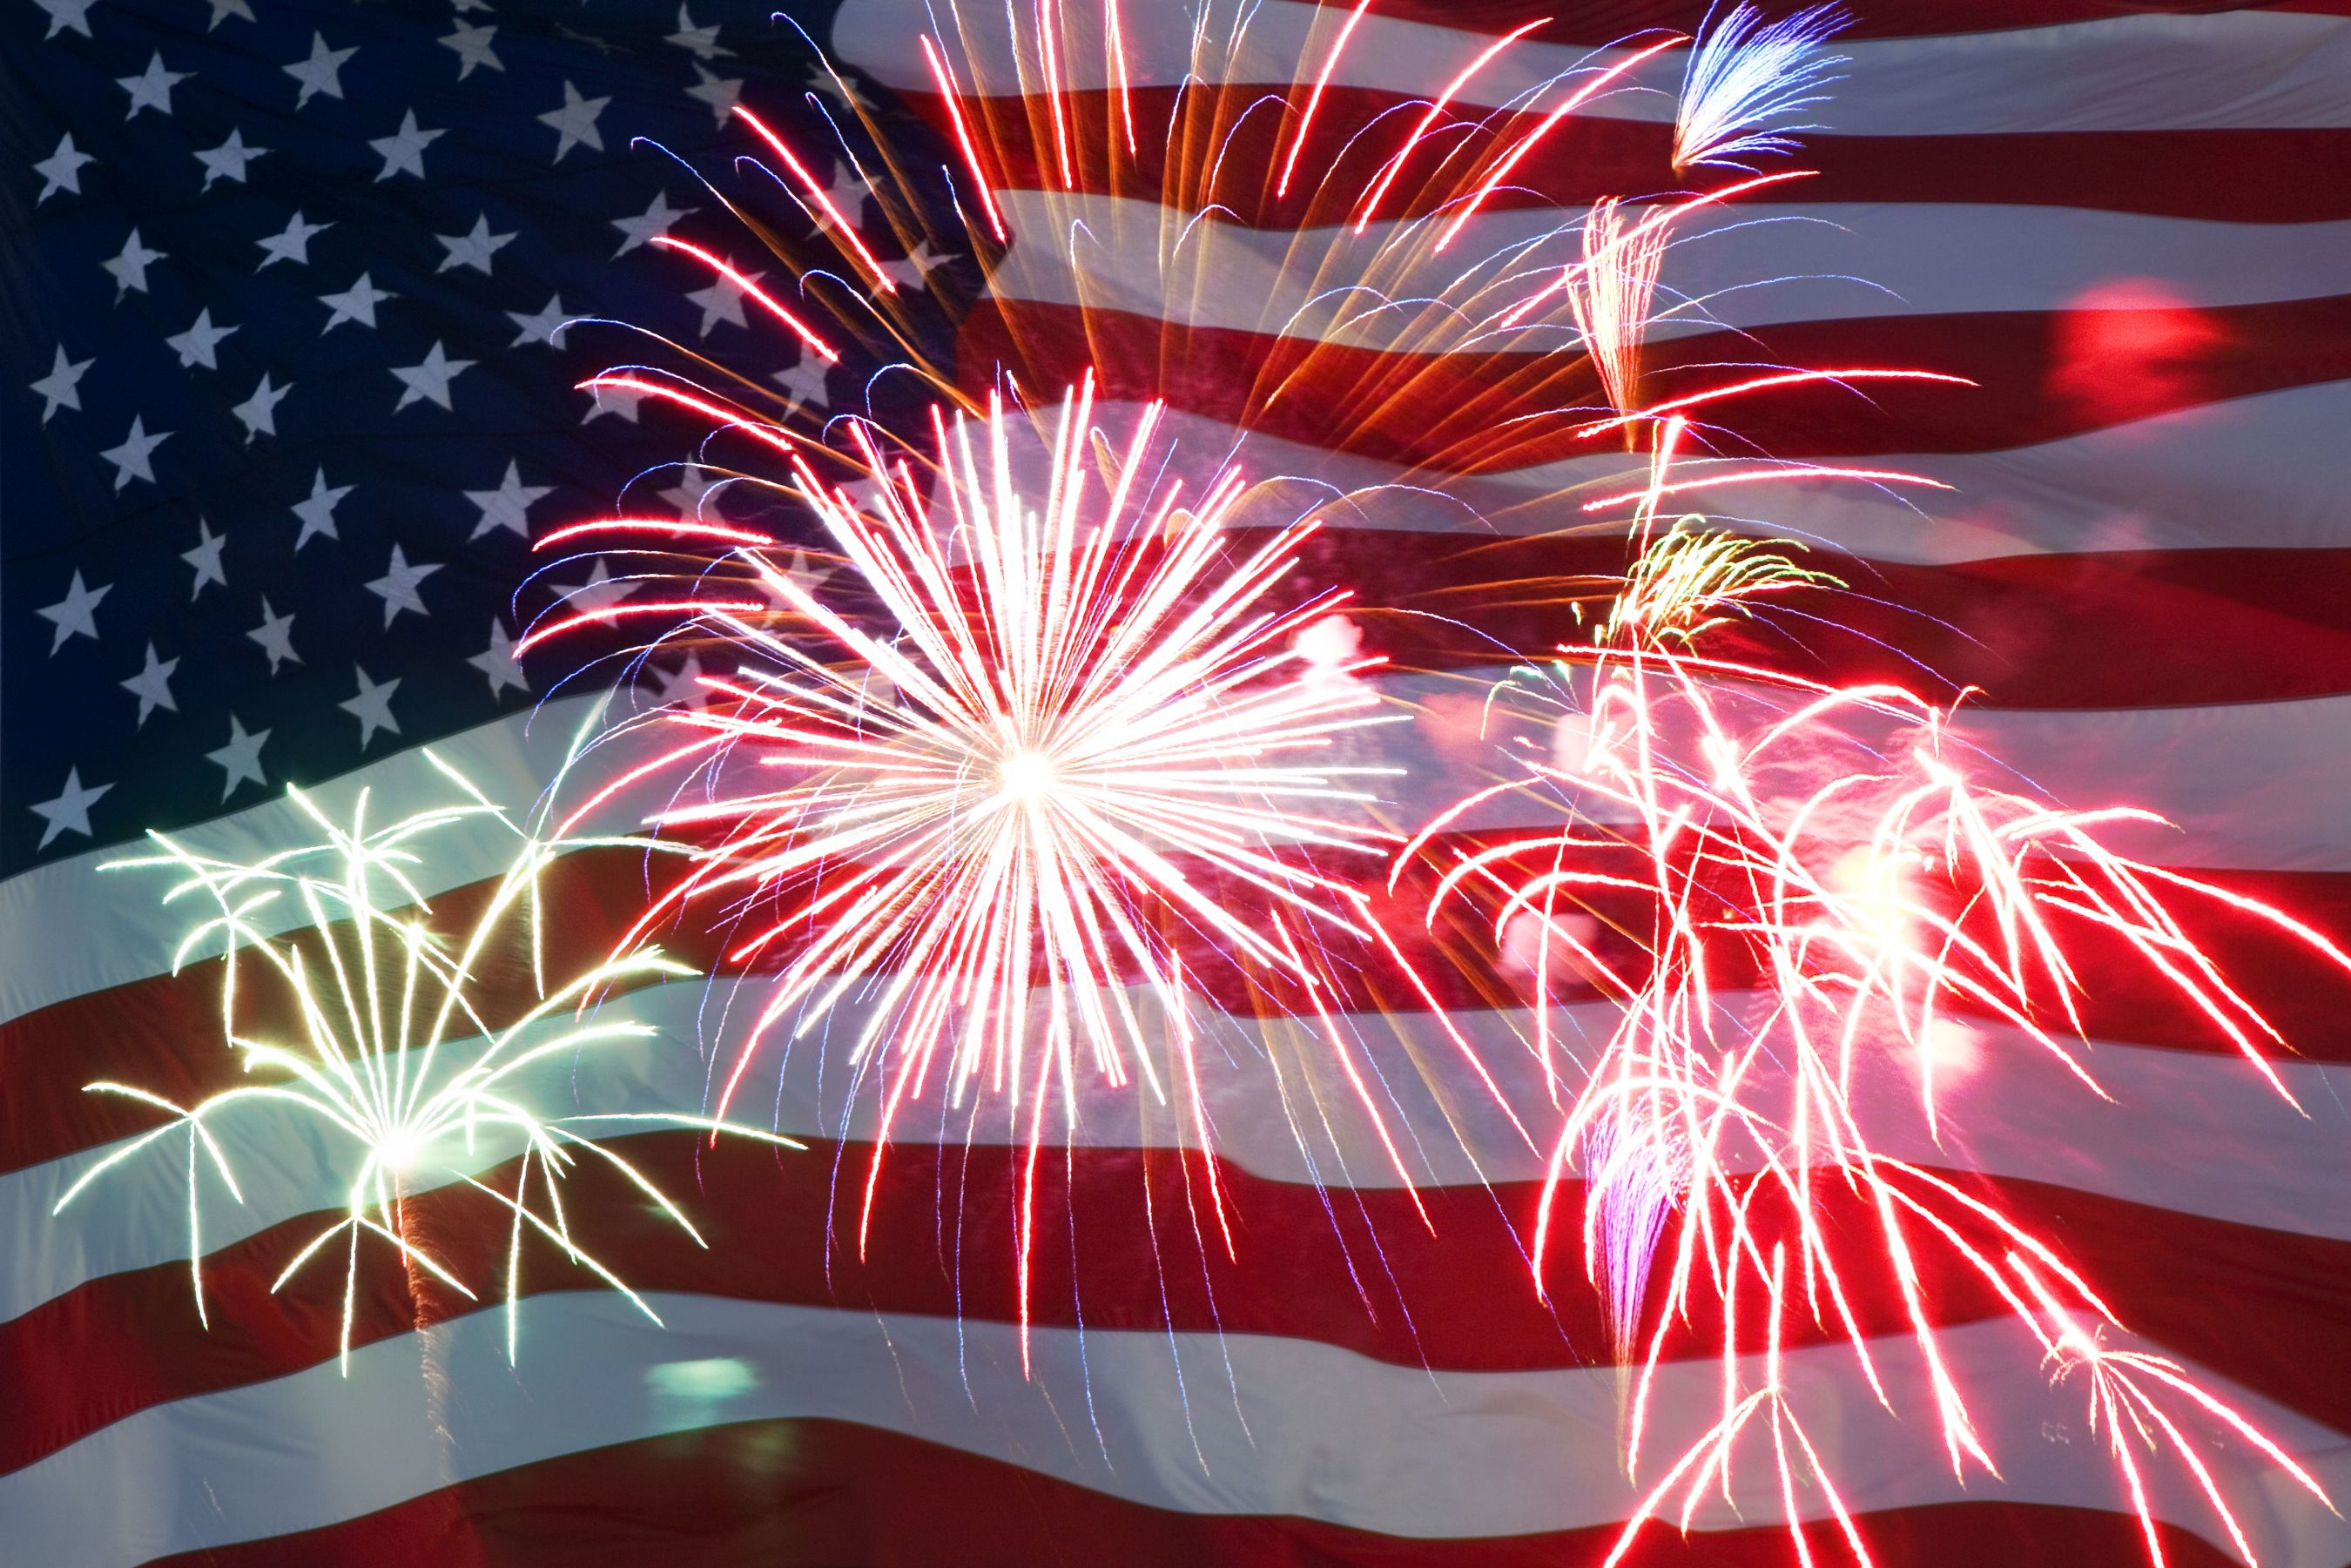 Livermore Downtown Celebrates The 4th Of July With A Fireworks Display